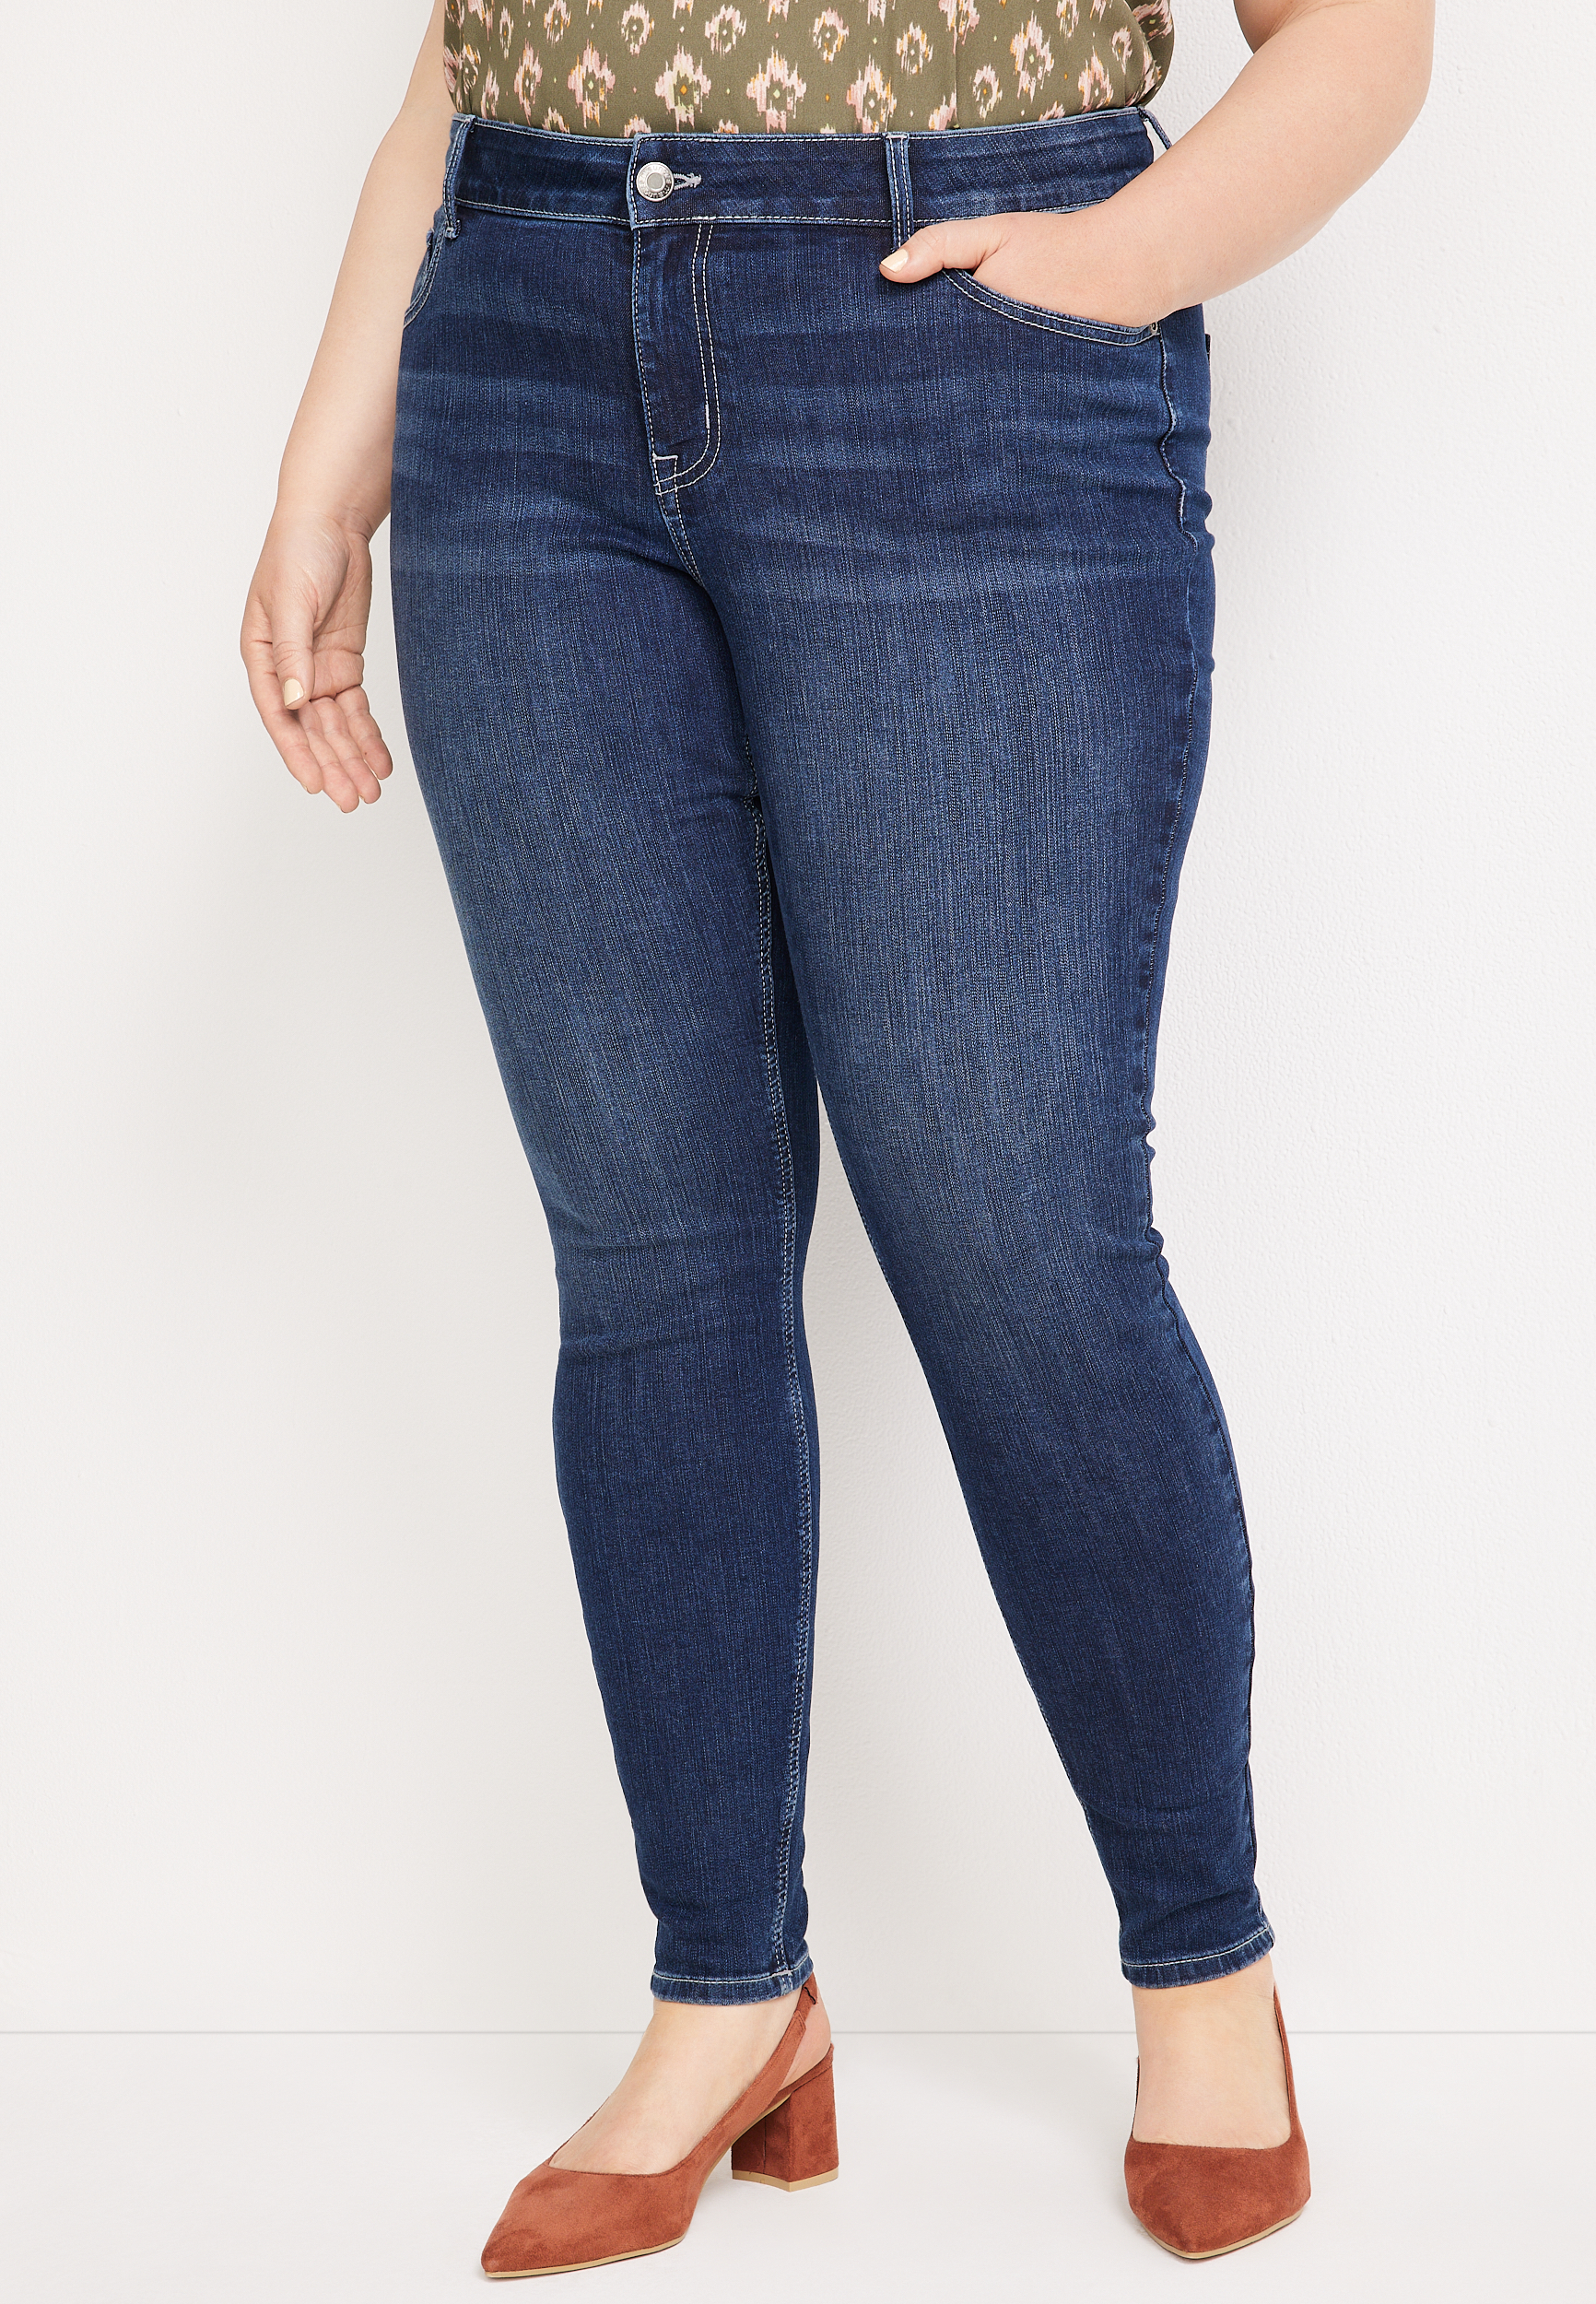 Plus Size m jeans by maurices™ Classic Skinny Mid Rise Jean | maurices